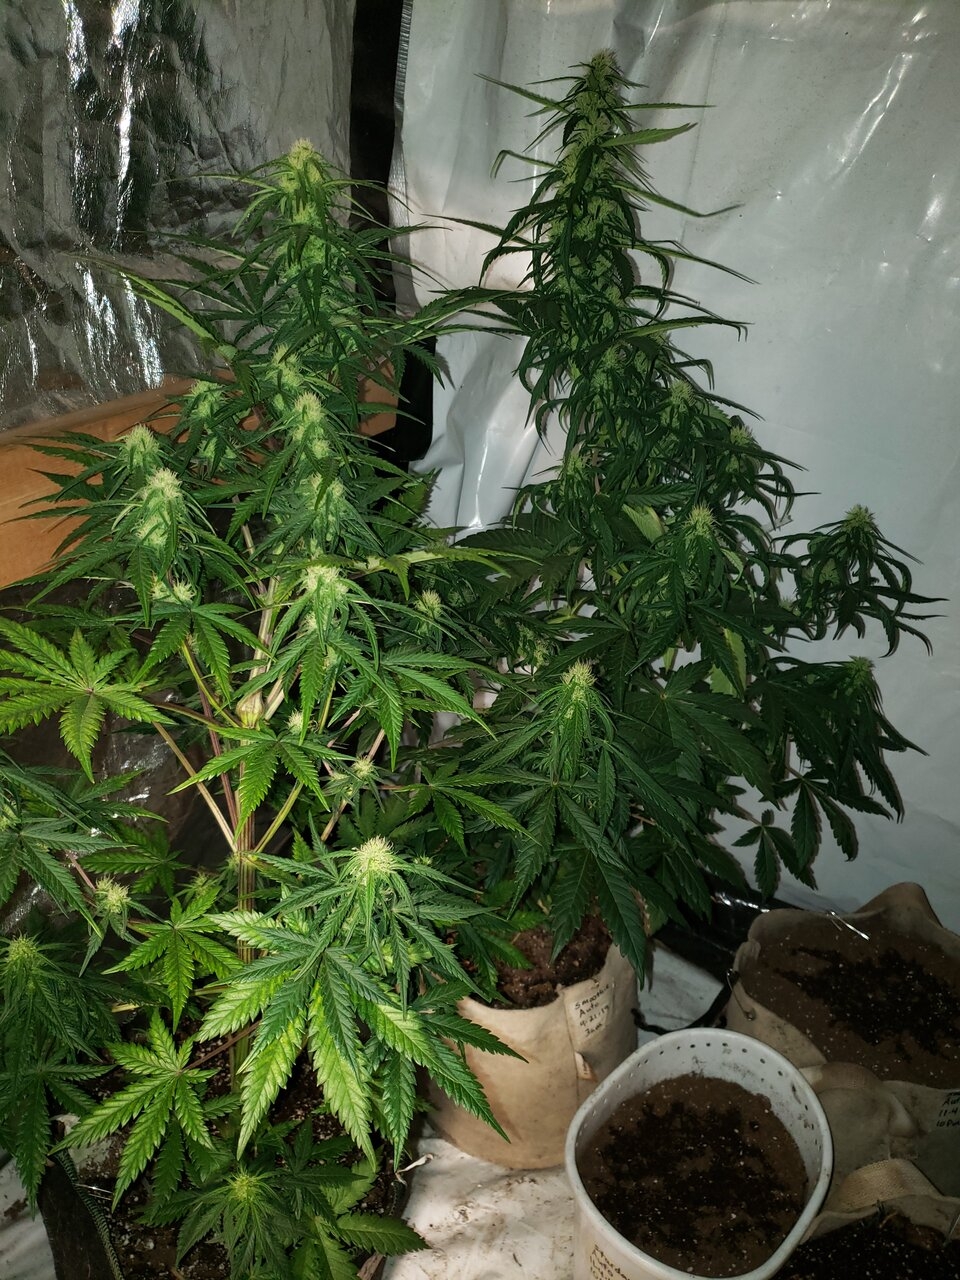 Both Stardawg and Smoothie auto 4 breeding